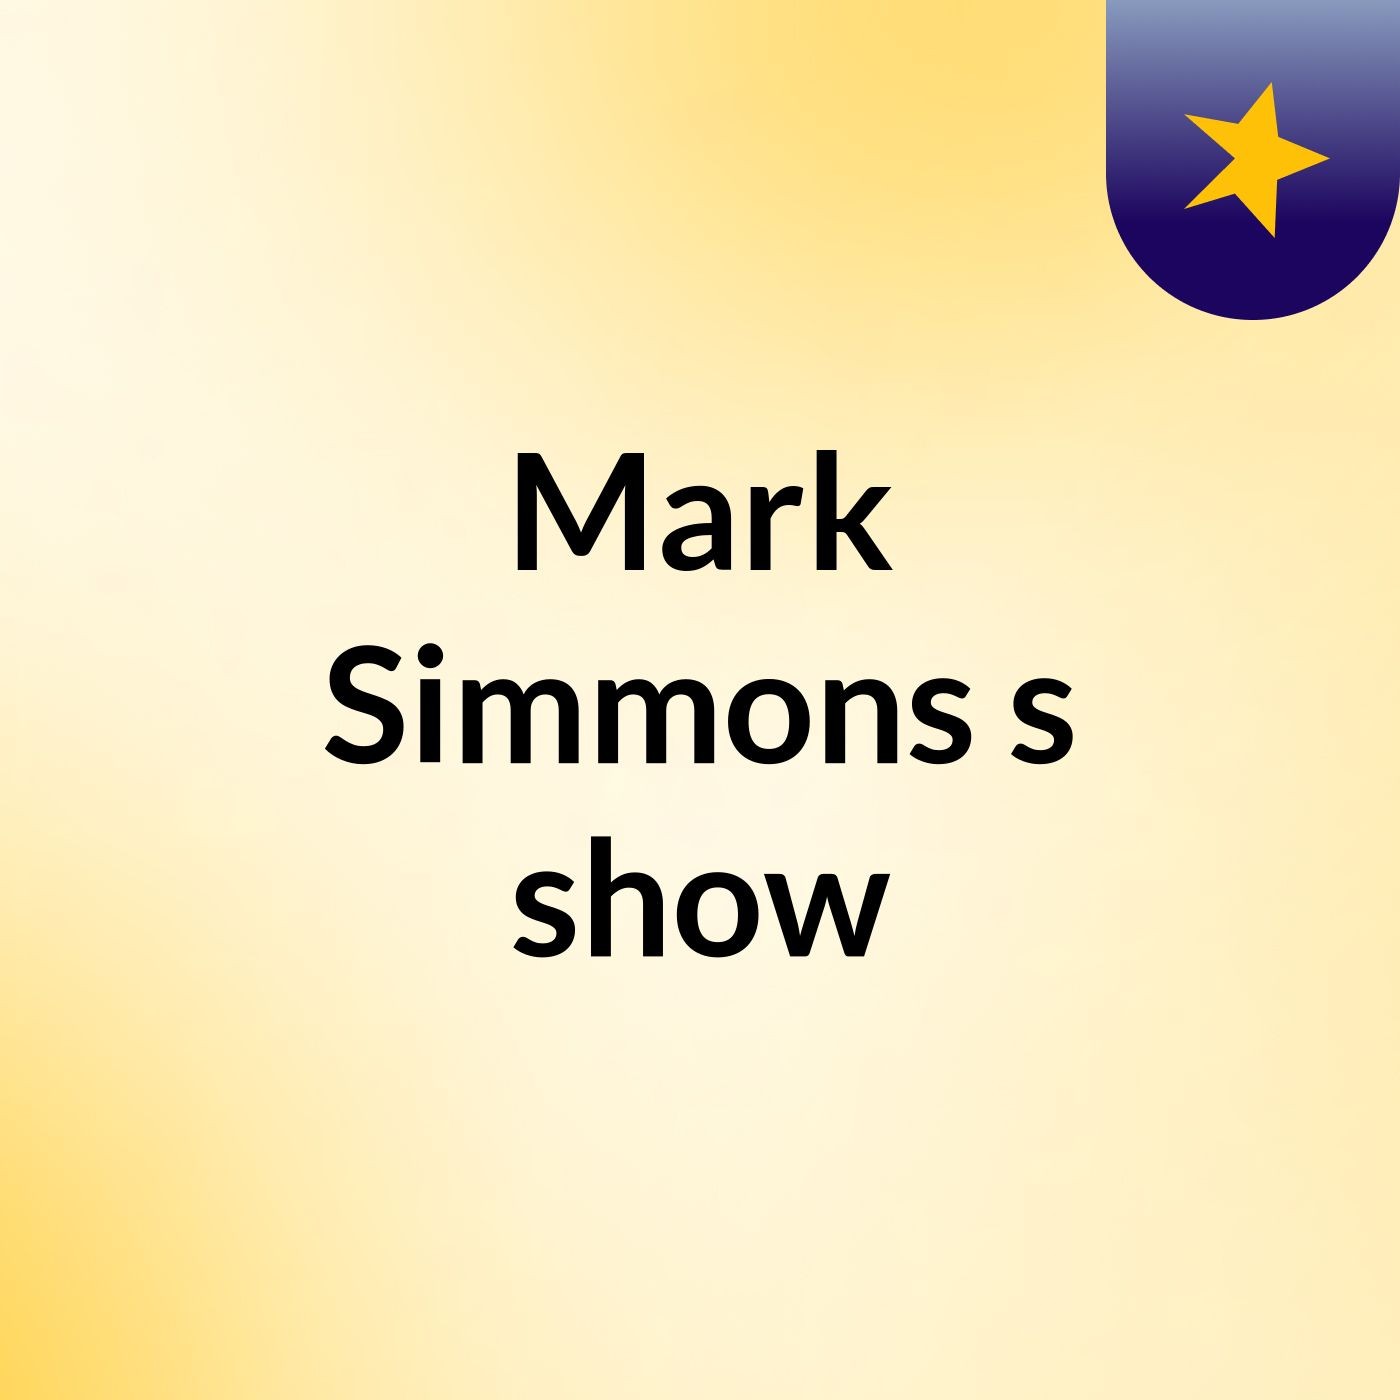 Episode 2 - Mark Simmons's show